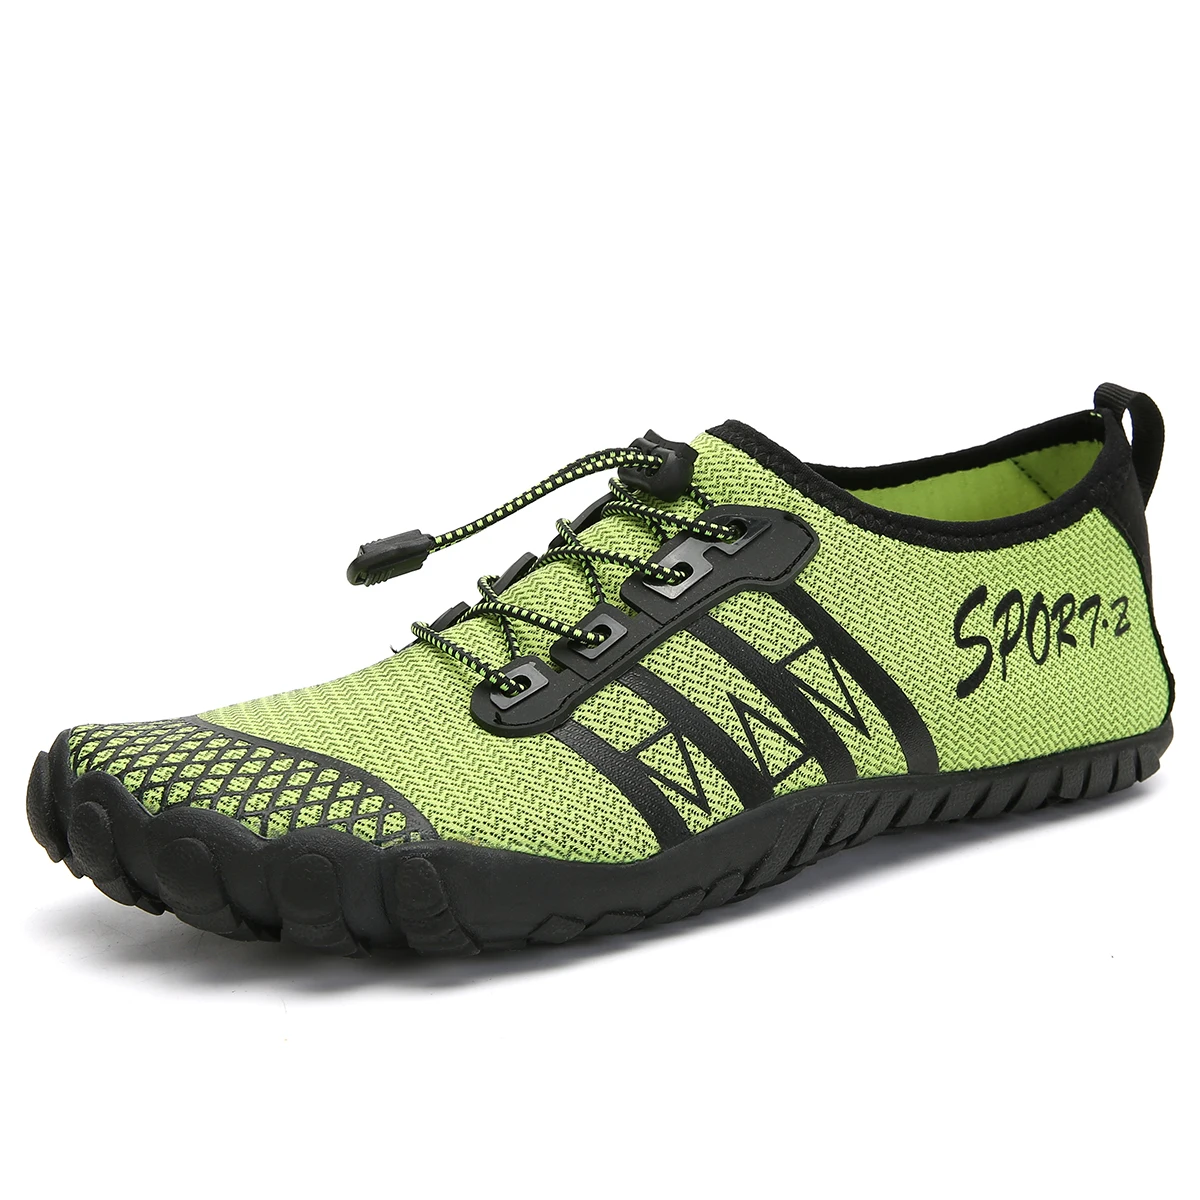 Breathable Outdoor Skin Diving Shoes cb5feb1b7314637725a2e7: Black|Blue|Gray|Green